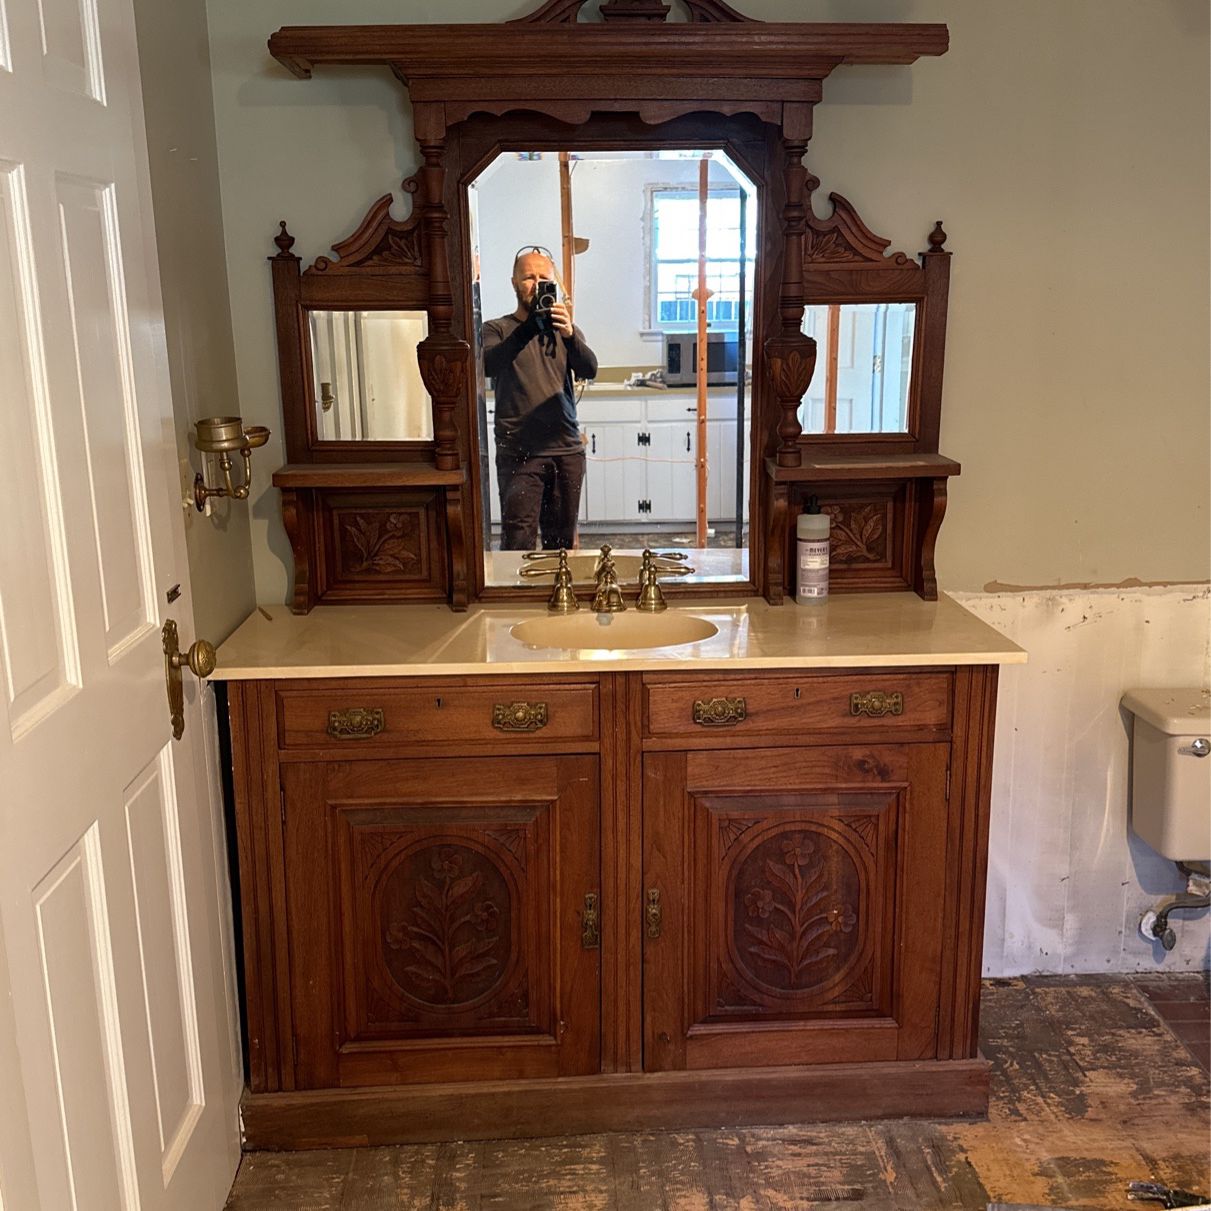 Free Antique Bath Vanity With Sink/mirror Counter Complete